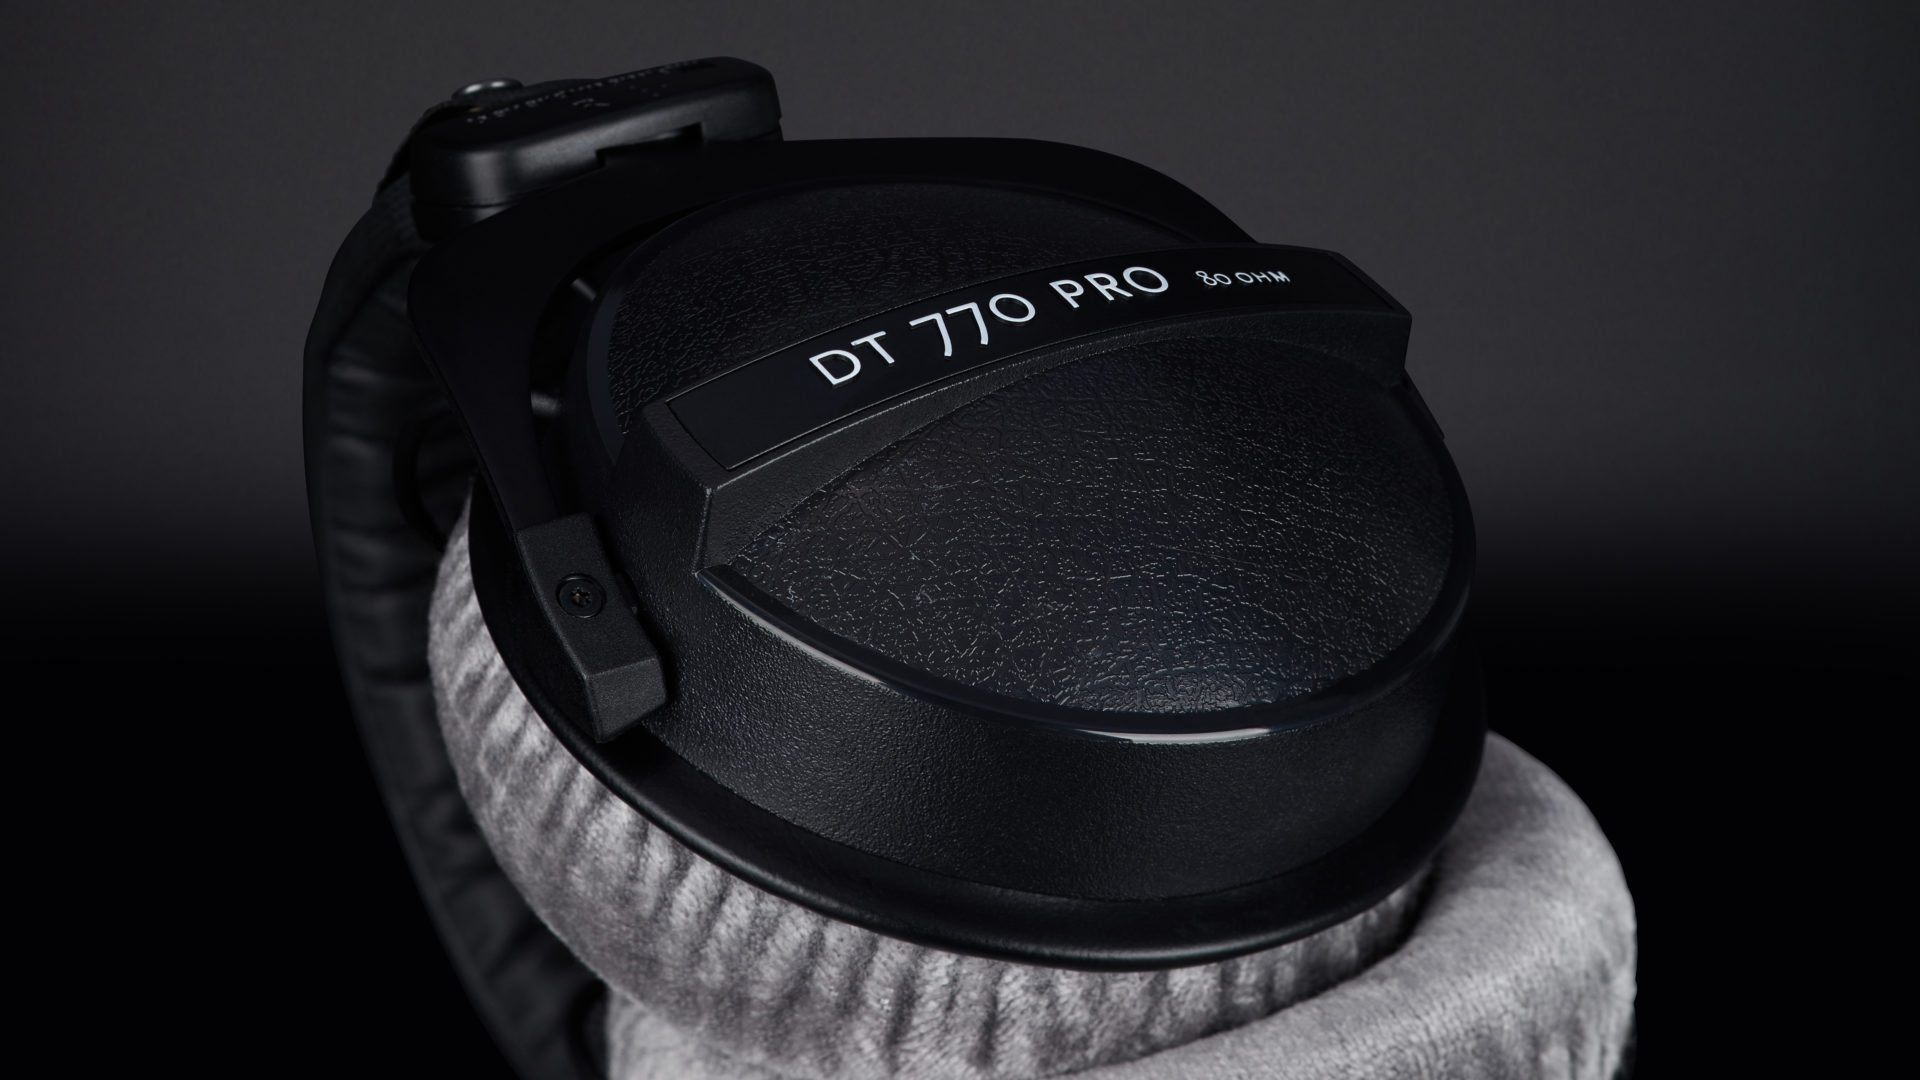 Beyerdynamic DT 770 Pro 80 Ohm Review - I like this one better